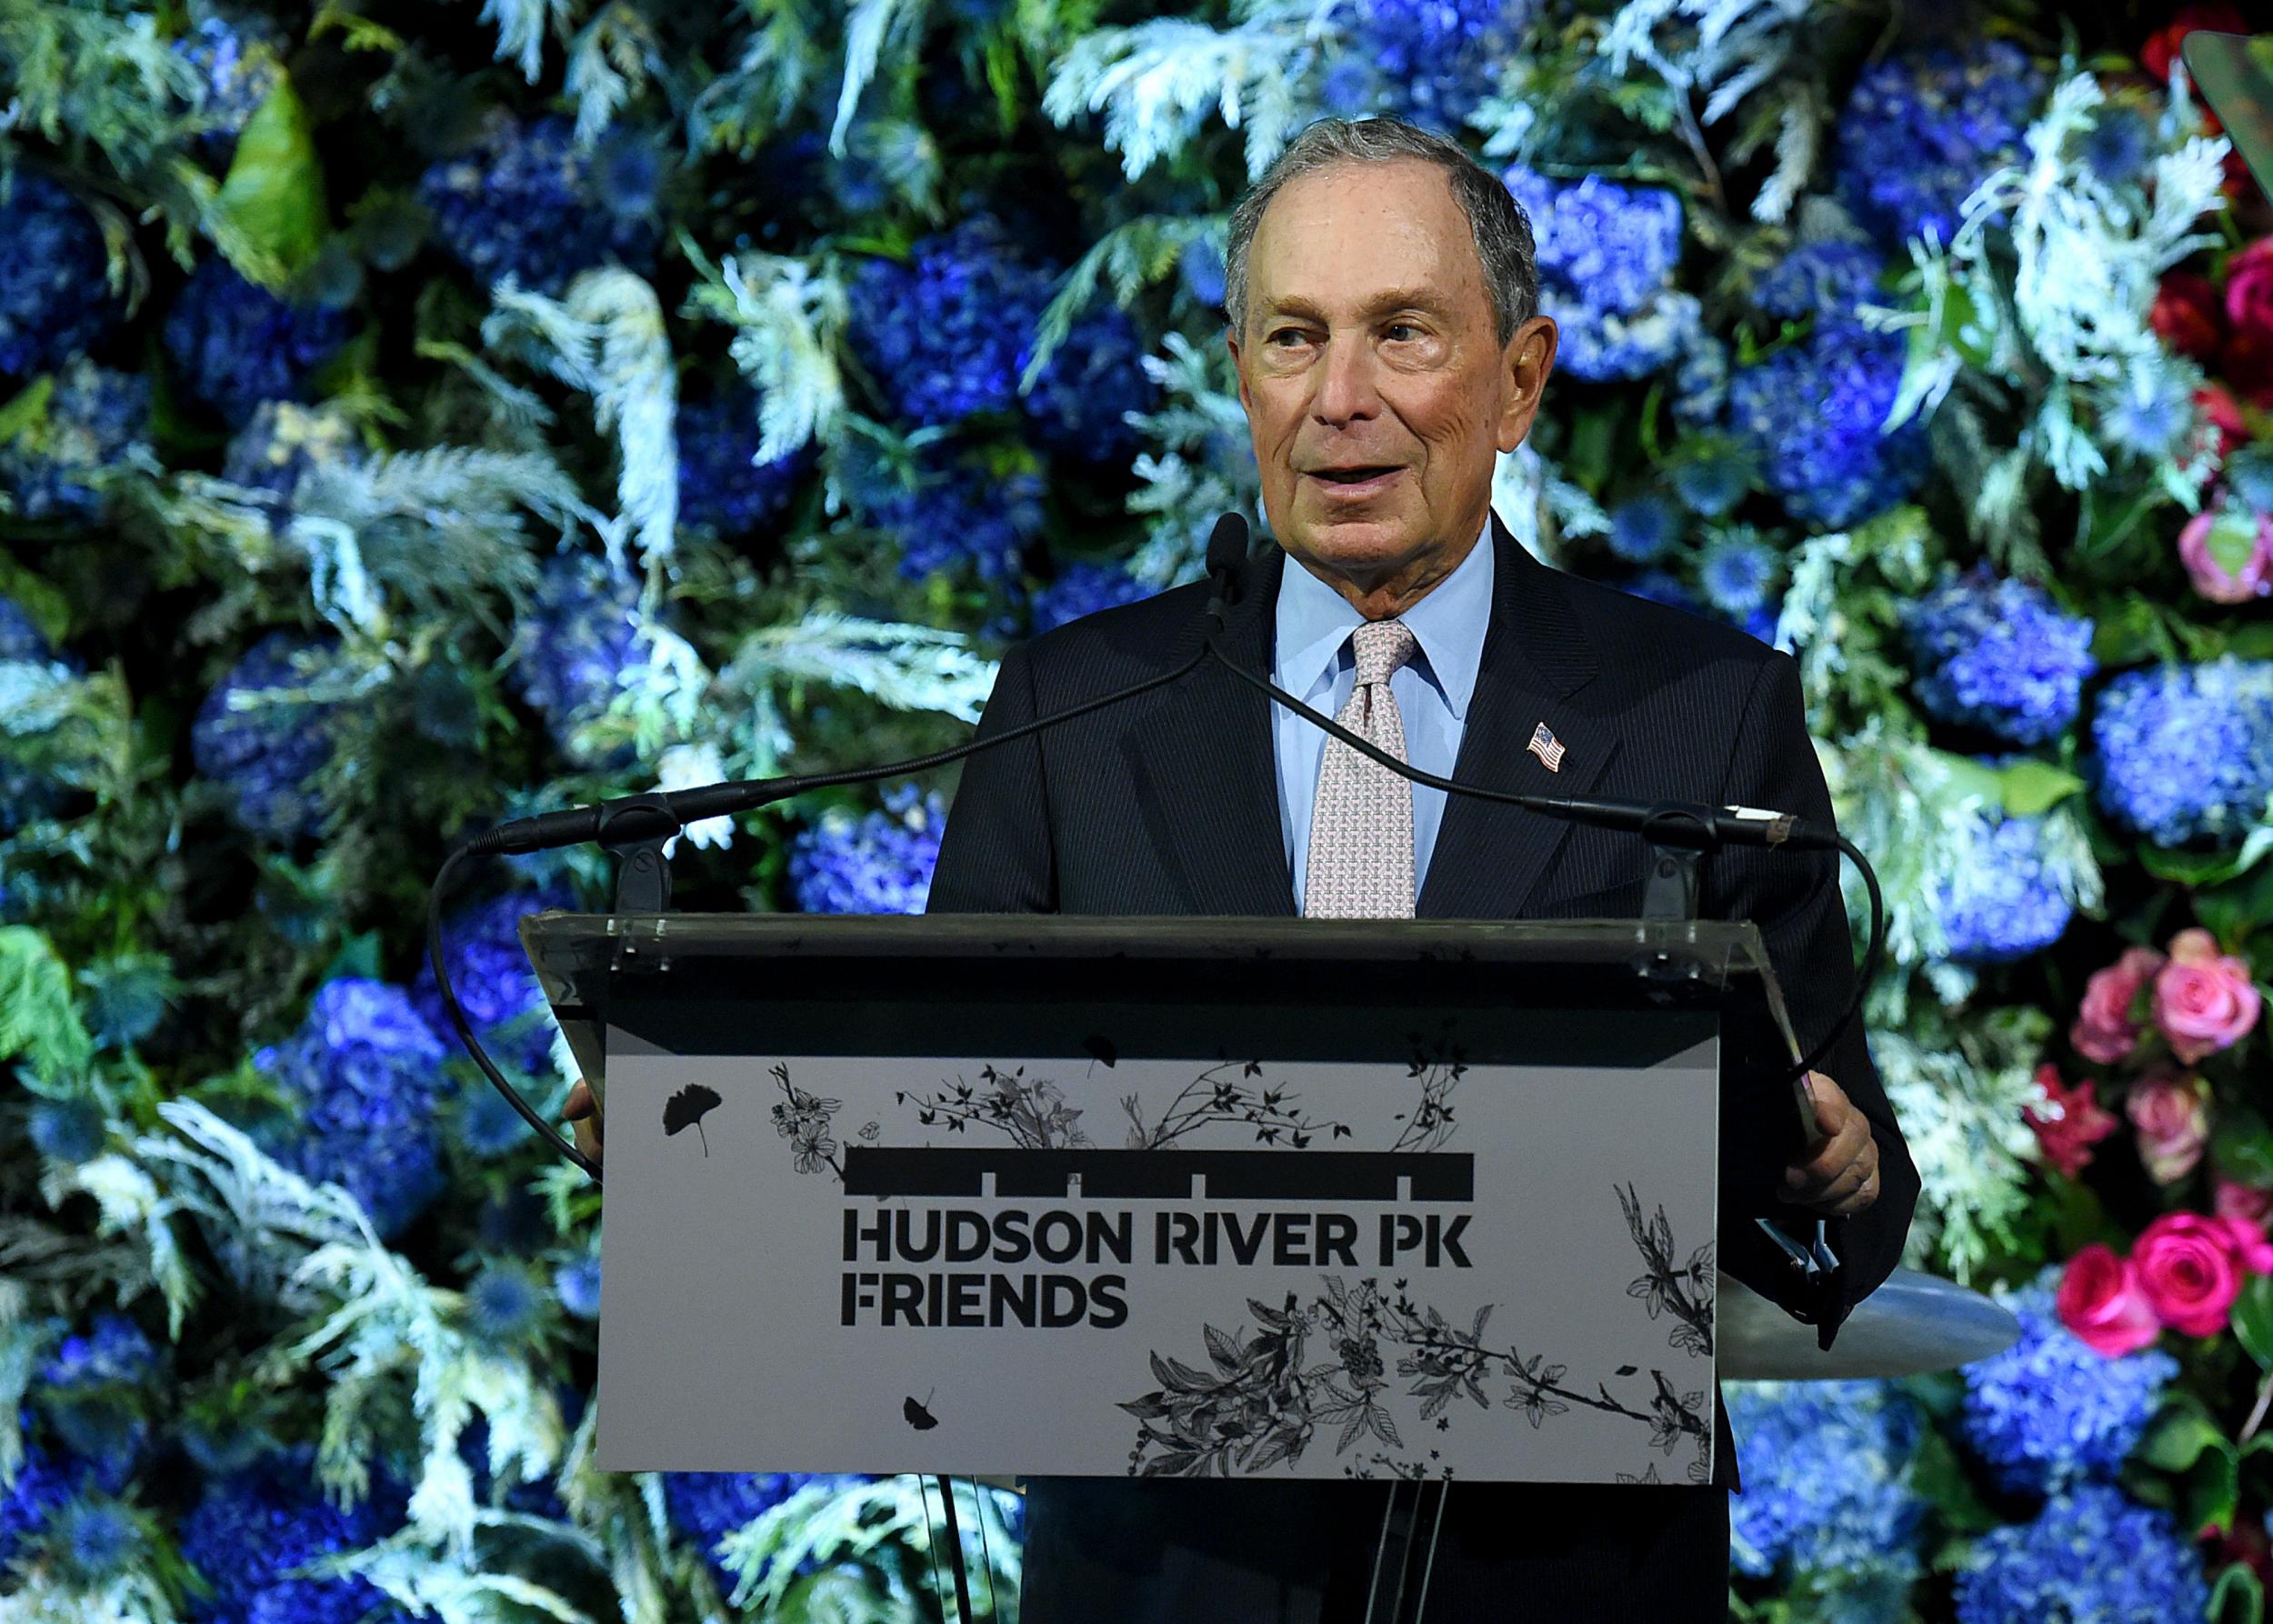 Michael Bloomberg files papers to formally join 2020 presidential race